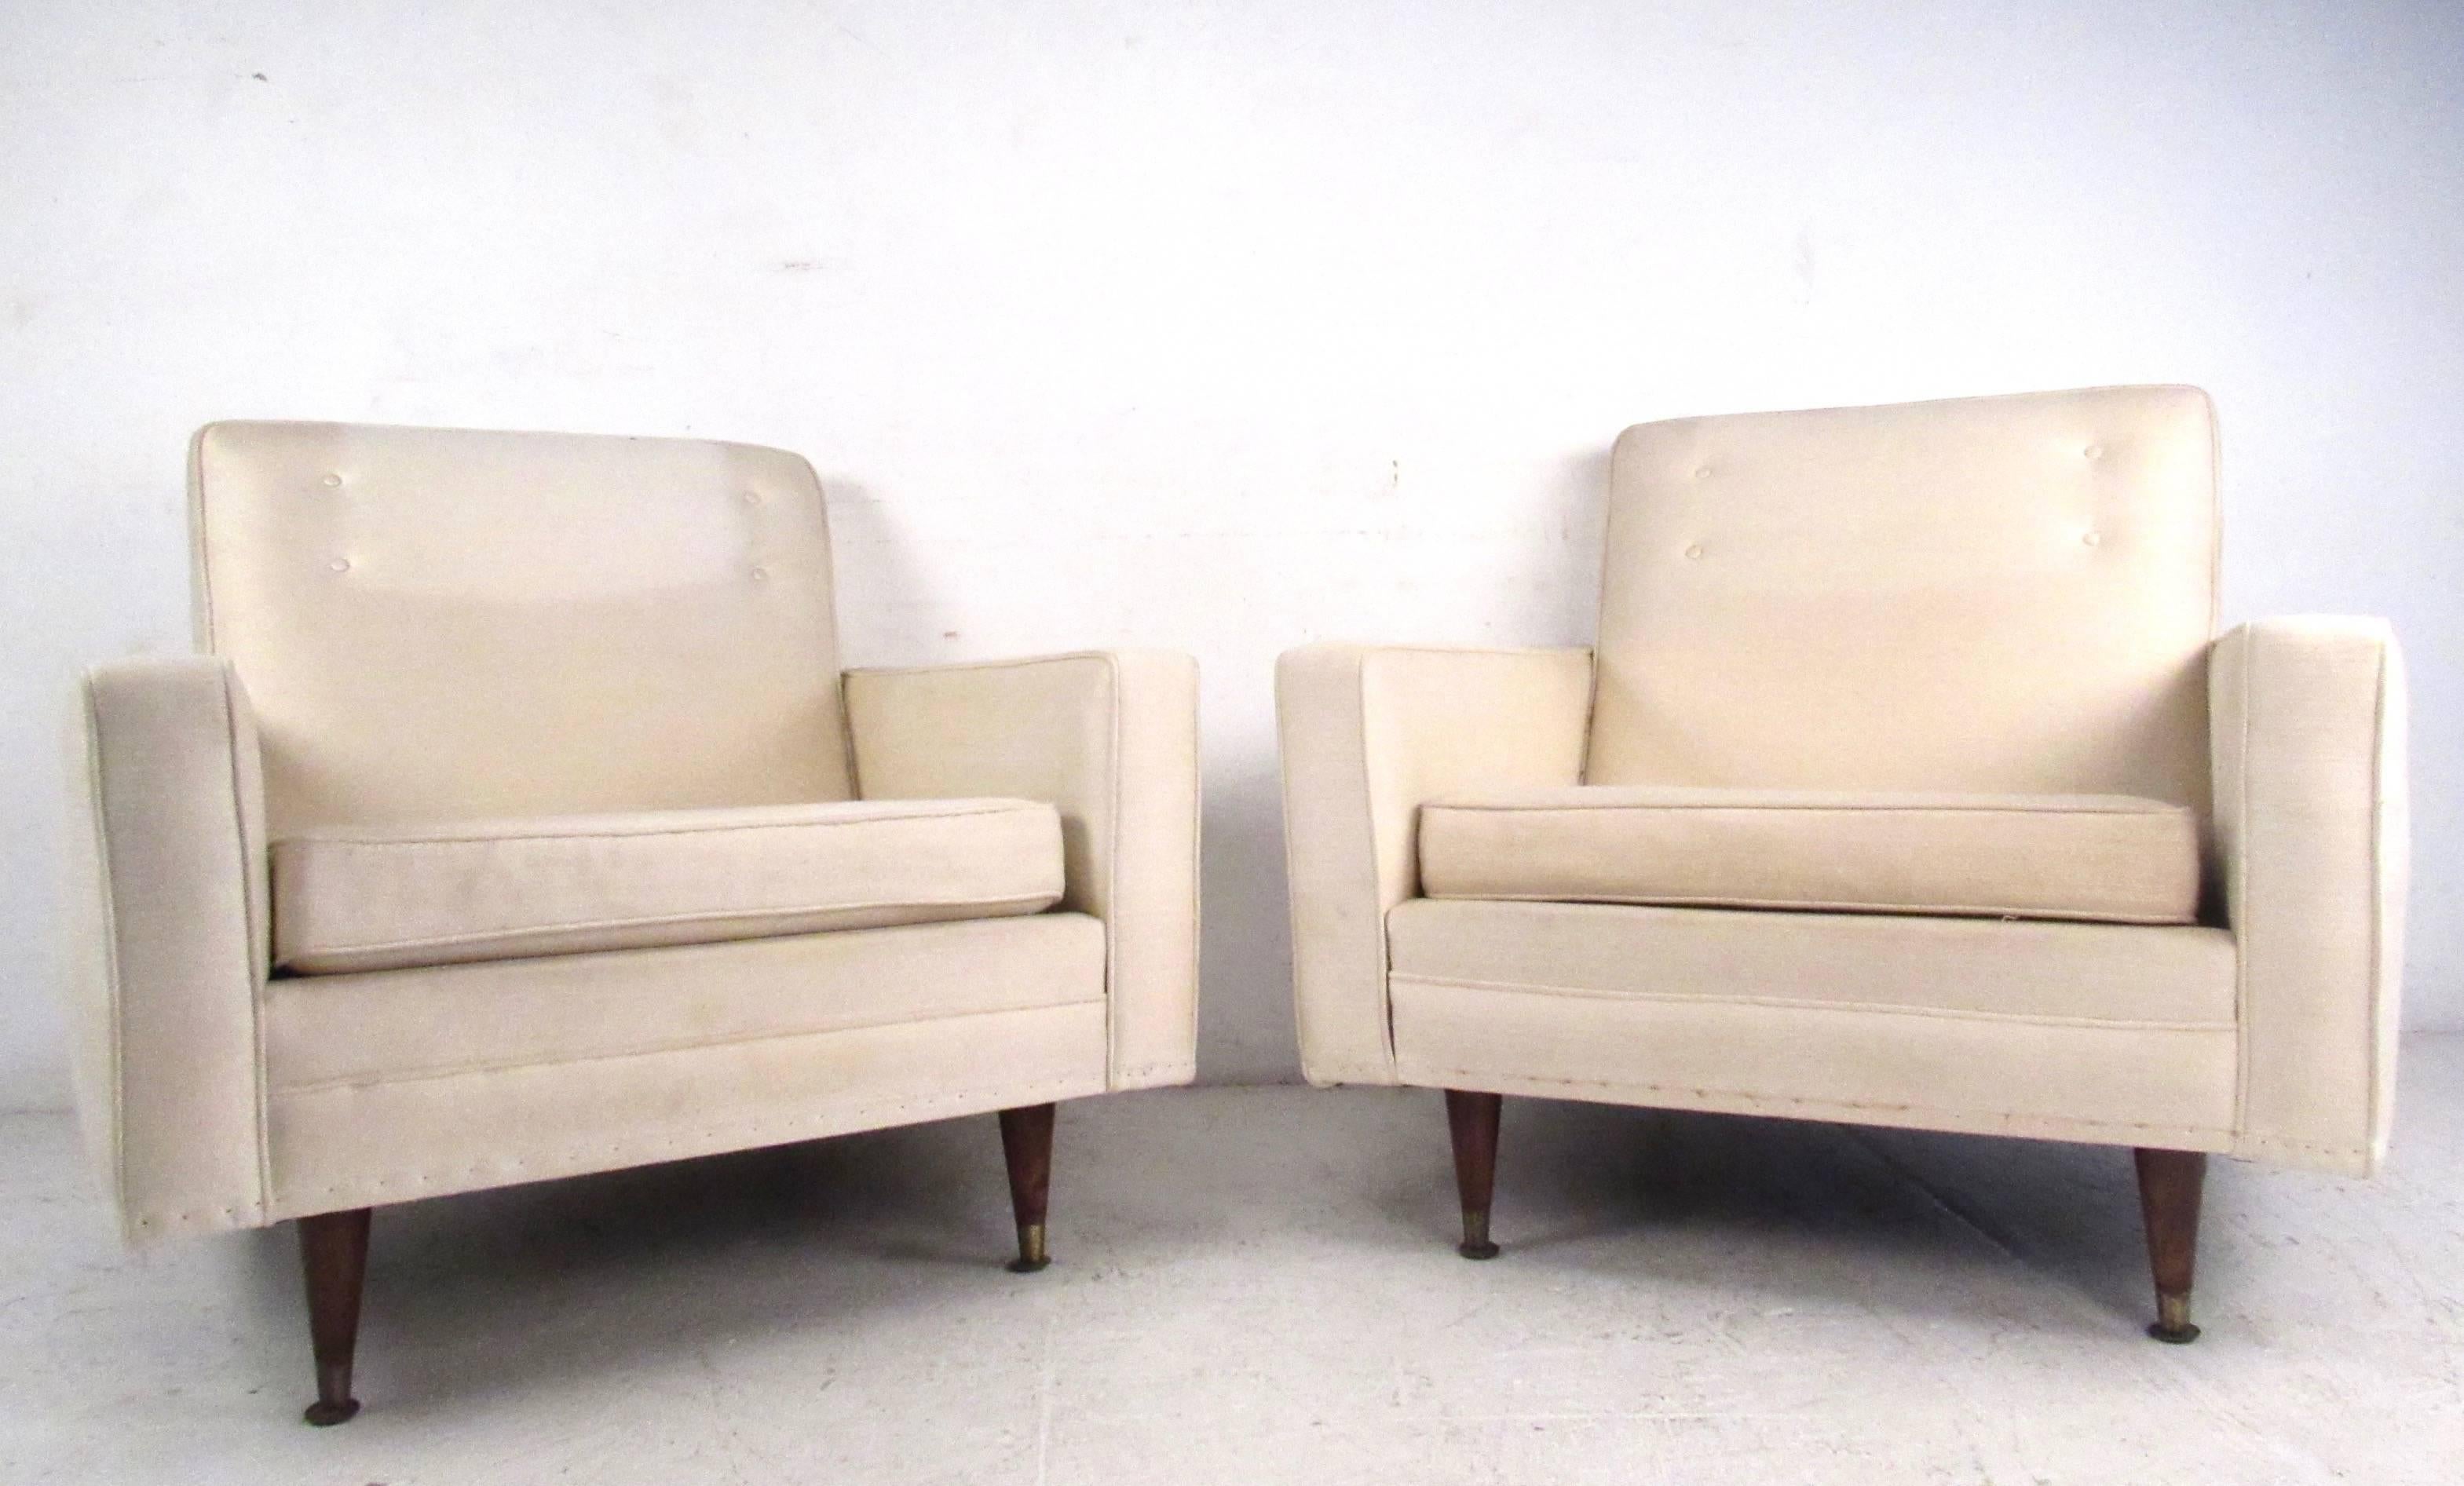 This pair of Mid-Century Modern lounge chairs feature the simplistic modern style of the 1960s and 1970s, with spacious comfortable seats, tapered legs, and brass feet. Button tufted seat backs and ample padding add to the appeal of this vintage